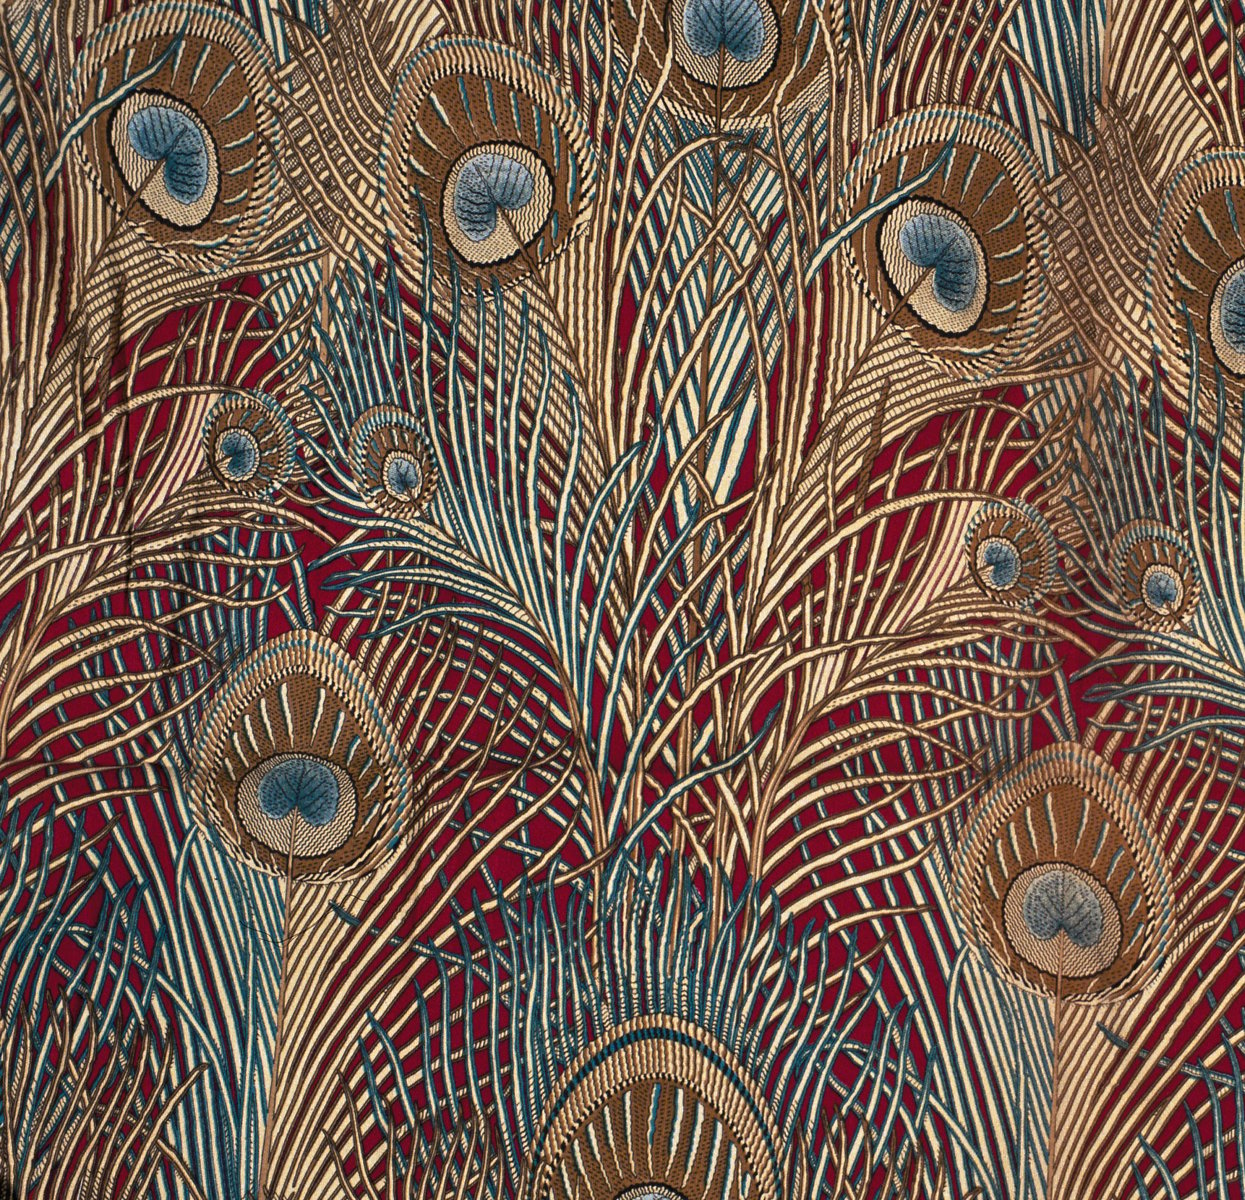 Luxury gold and blue peacock design fabric with Christopher Dresser Textiles Harry Lyons in white font below